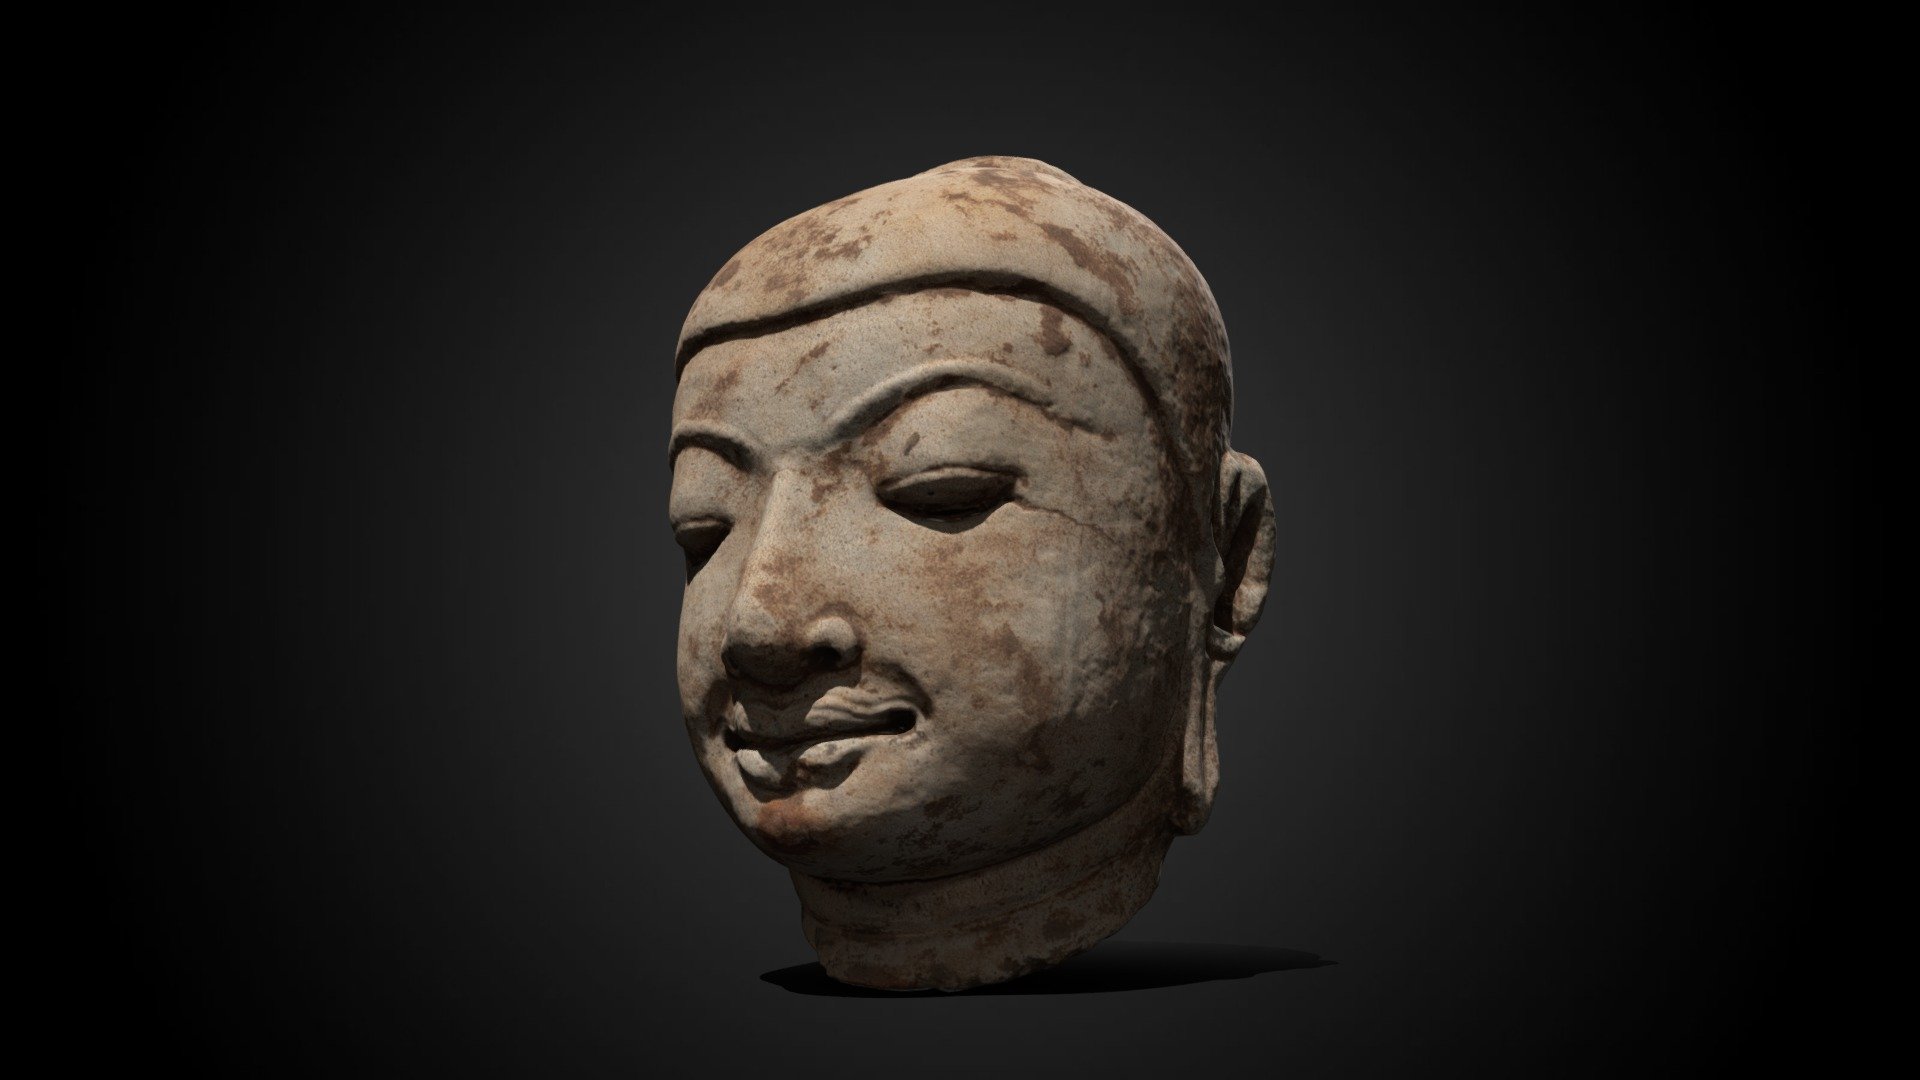 Head from an image of the Buddha, 11th-12th century CE, now in the collection of the Minneapolis Institute of Art.

From the sculpture's description on artsmia.org:

&lsquo;In what was&hellip;one of the wealthiest cities and greatest religious centers of the entire world, ancient Pagan (1044–1287 CE) in central Myanmar (Burma), more than 2,000 Buddhist monuments remain scattered across the arid plain. The largely abandoned brick stupas (reliquary buildings) and temples were once lavishly decorated with multicolored stucco (plaster) molding and sculpture&hellip;

This sensitively modeled Buddha head reflects the meditative calm and somewhat sweet, humanistic quality associated with art of the neighboring Pala dynasty of Bengal, India. Its Buddhist sculptural traditions had reached Pagan by about 1000 CE through the portable mediums of bronze and terracotta.'

More information here - Head from an image of the Buddha, 11th-12th C CE - Download Free 3D model by Minneapolis Institute of Art (@artsmia) 3d model